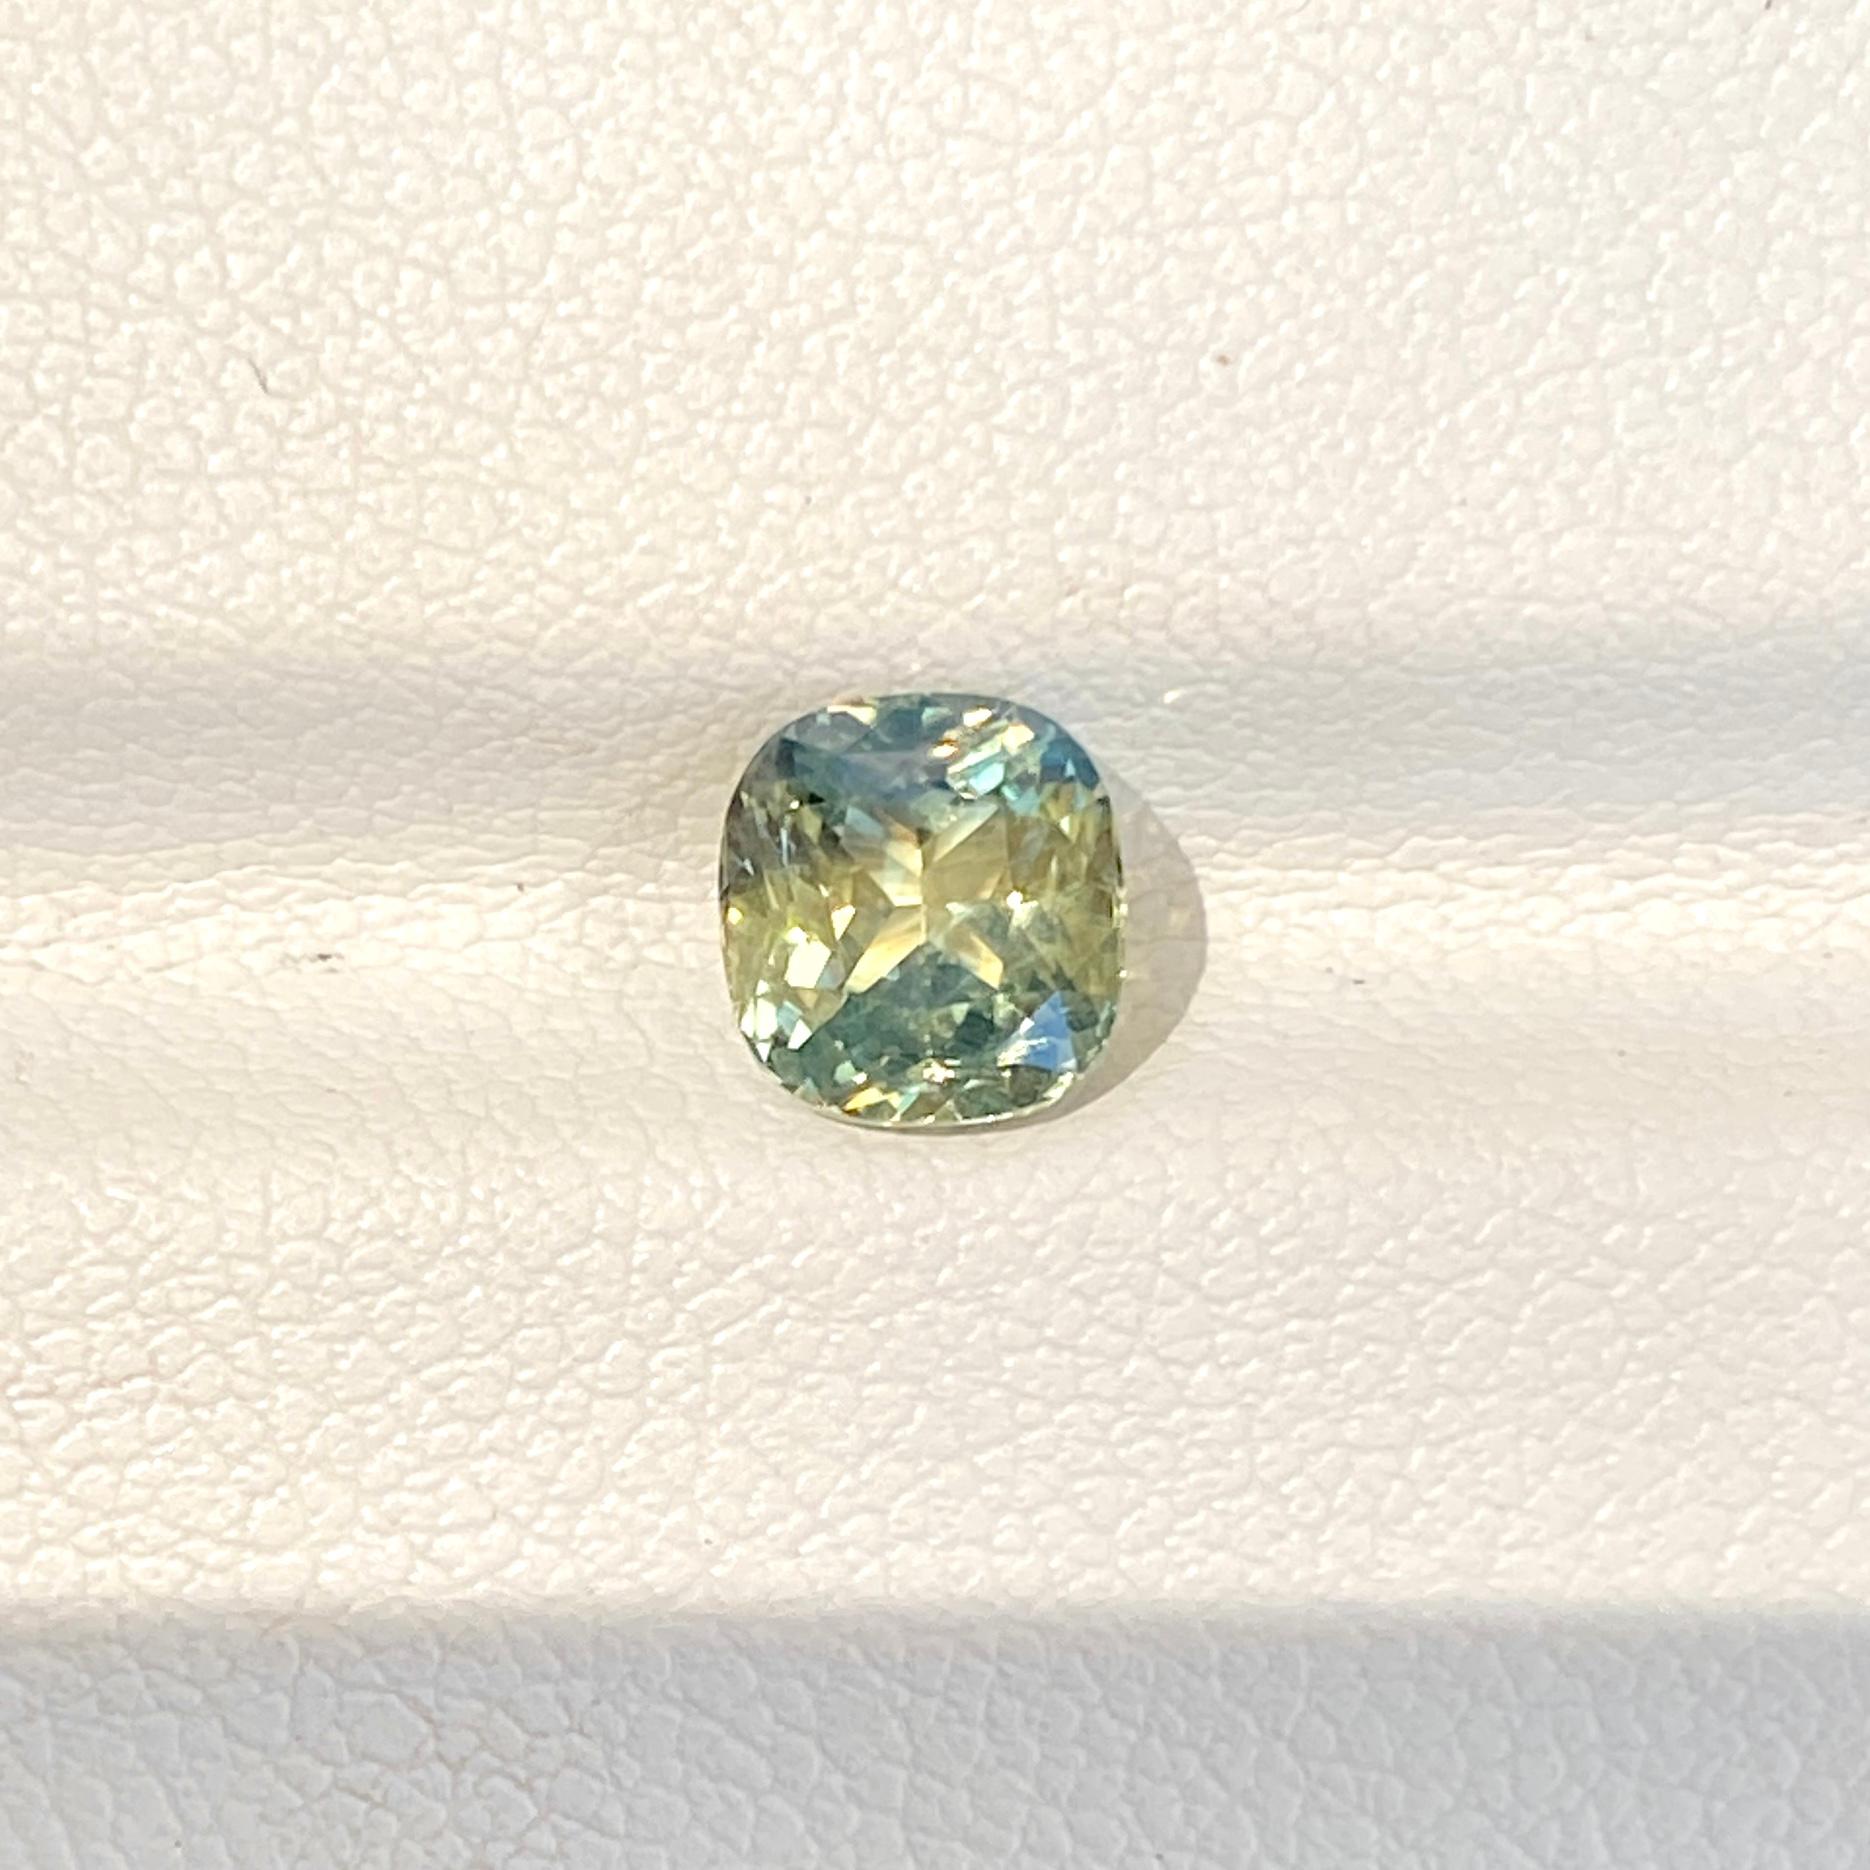 Soft rounded corners on this cushion cut light teal parti sapphire offers an attractive option for a custom made jewel of your choice. Bright minty pops of lime and yellow colour glisten from this charismatic natural unheated light teal